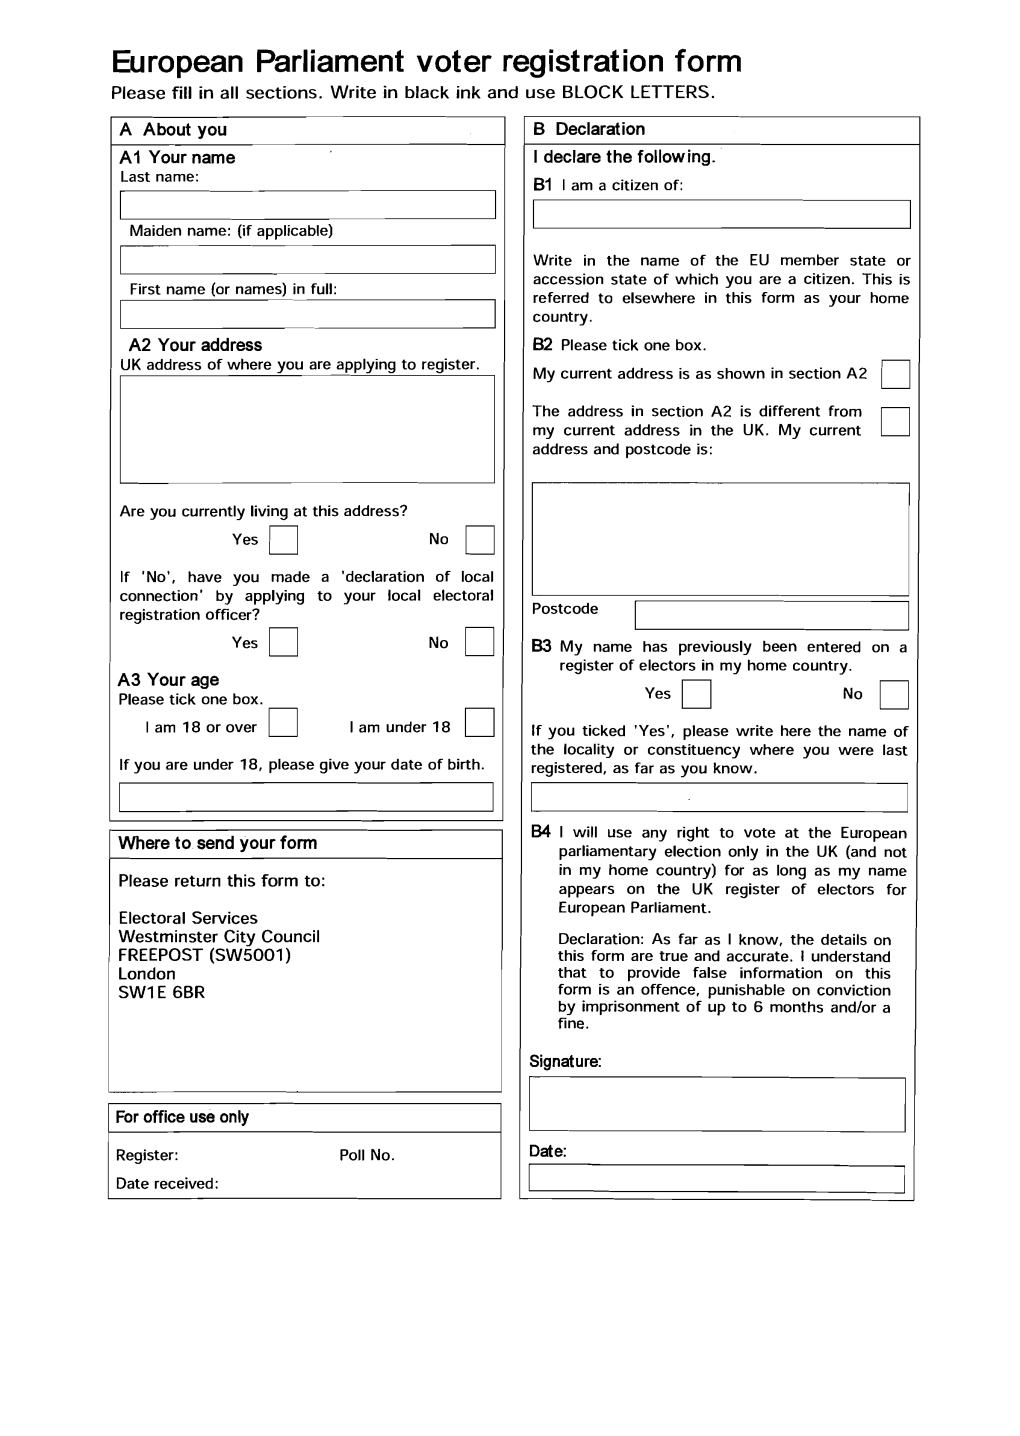 European Parliament Voter Registration Form Please Fill in All Sections